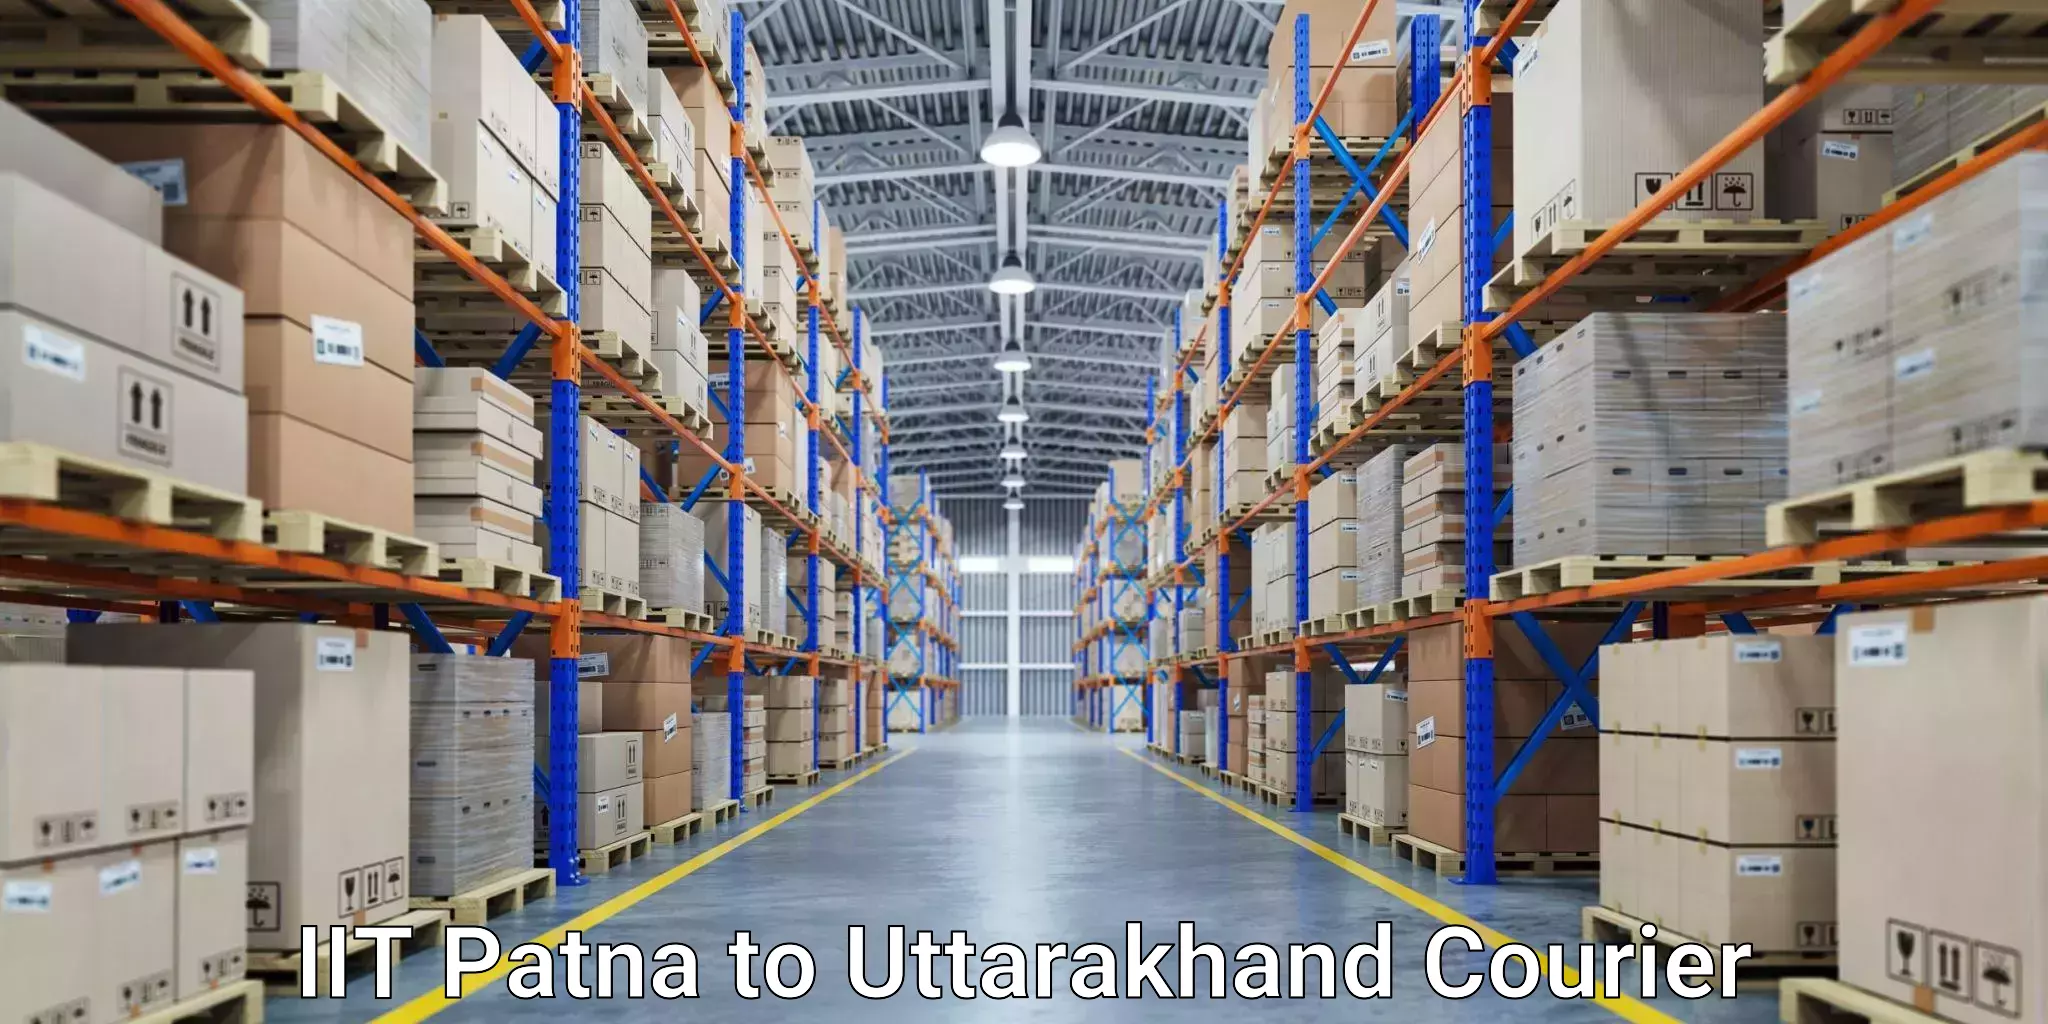 Expedited shipping solutions IIT Patna to Rudrapur